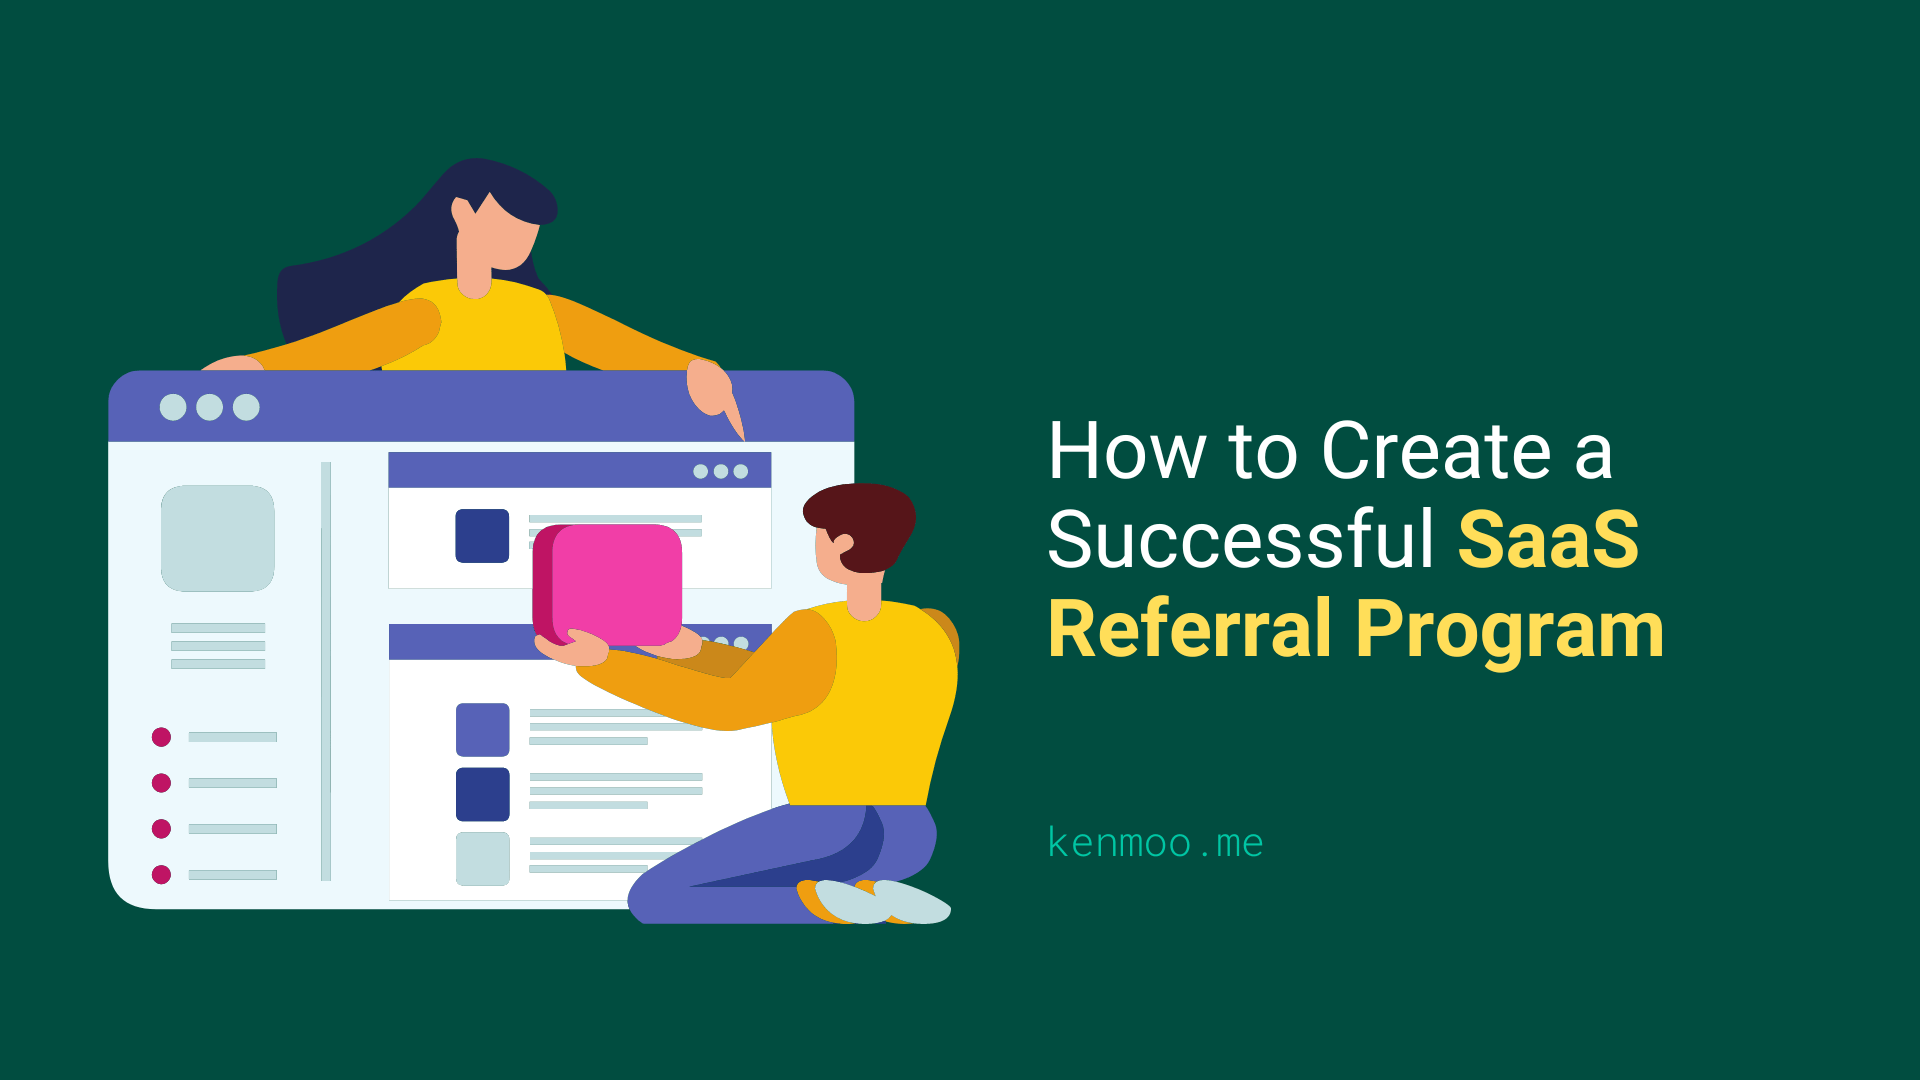 How to Create a Successful SaaS Referral Program